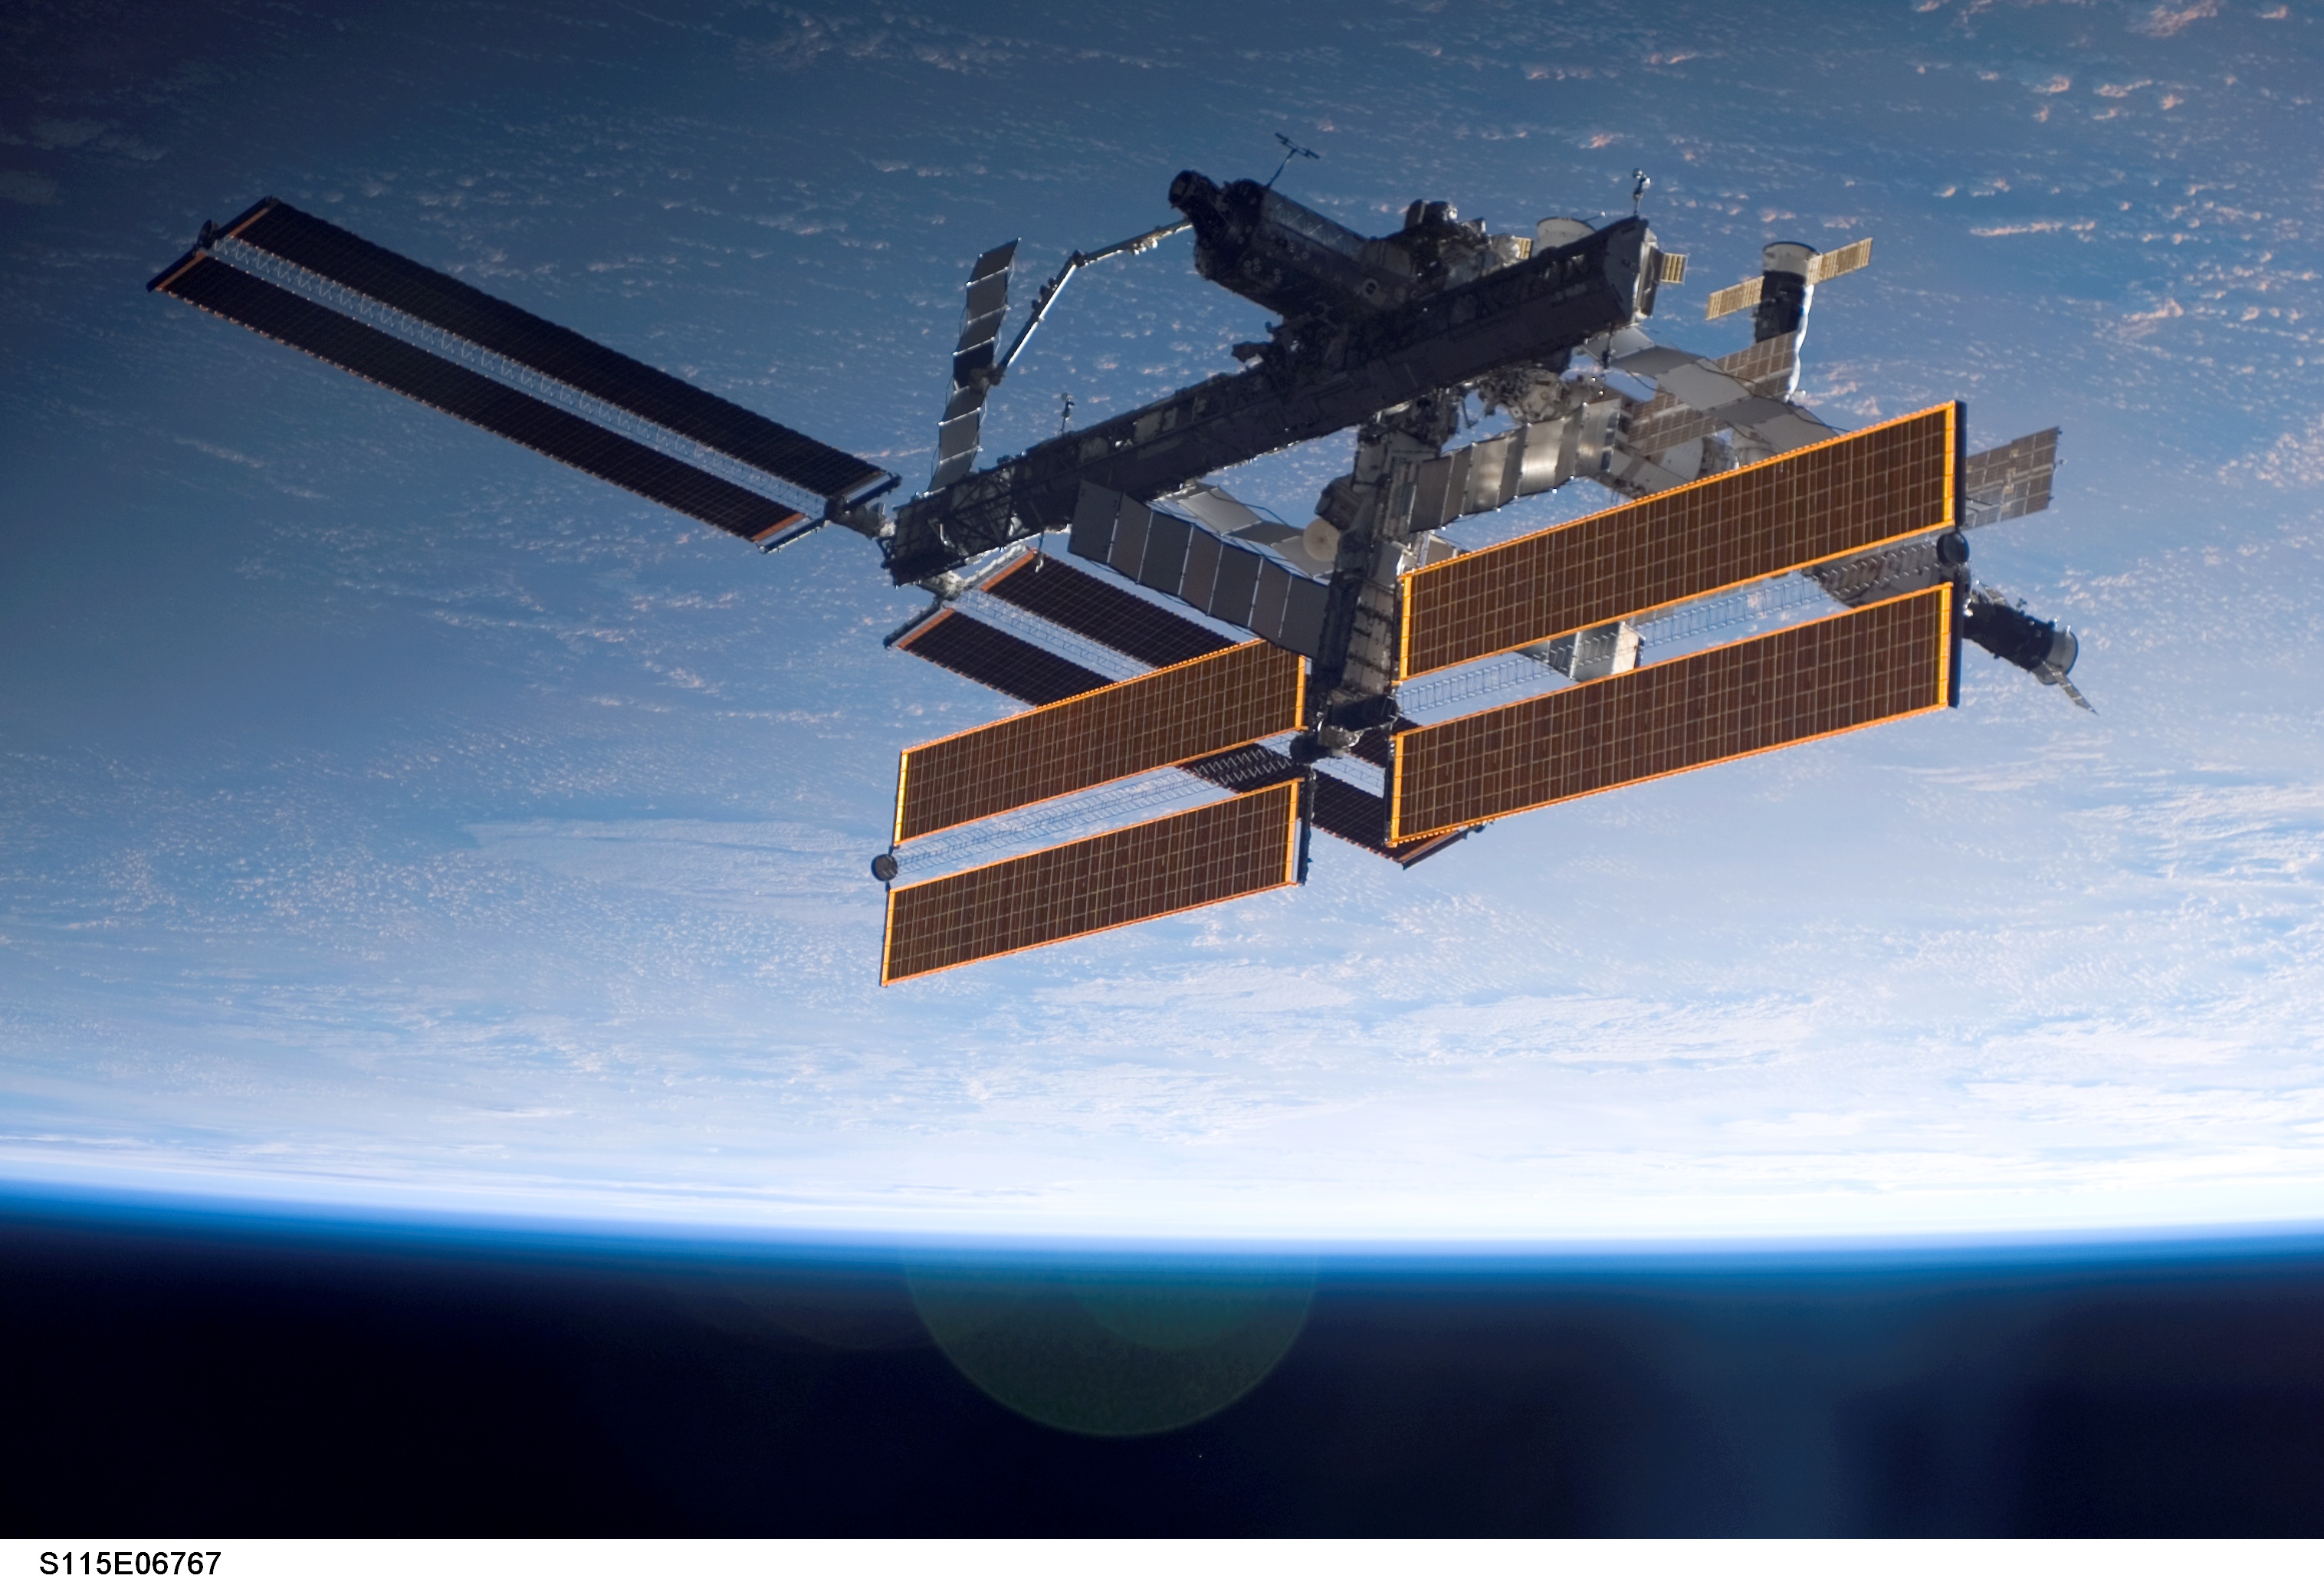 The International Space Station Expands Again